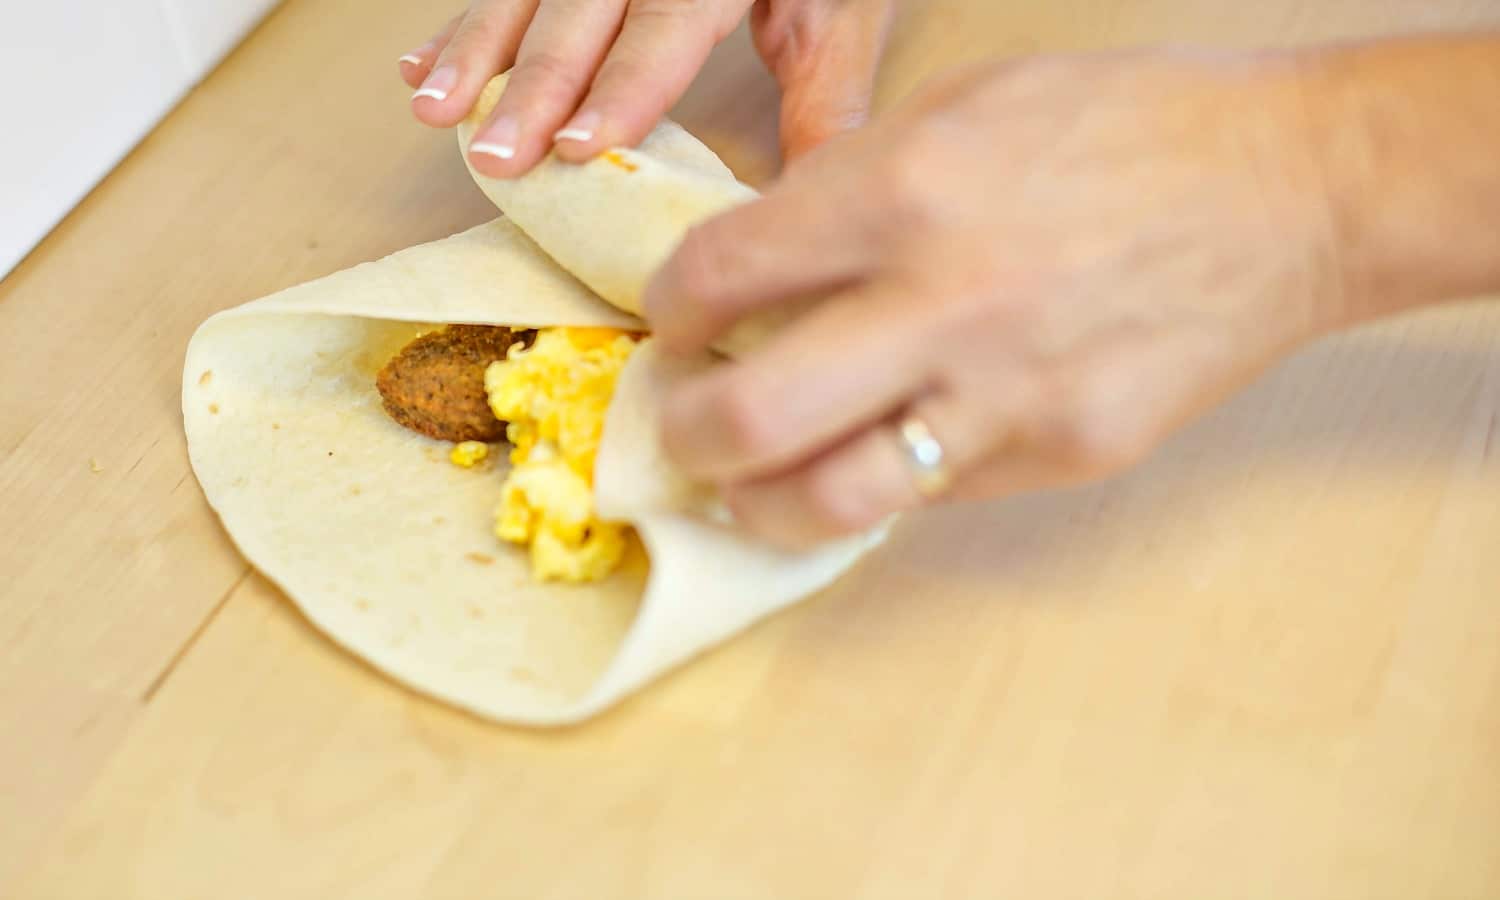 Add eggs and sausage, plus any other ingredients, into the tortilla and roll into a burrito